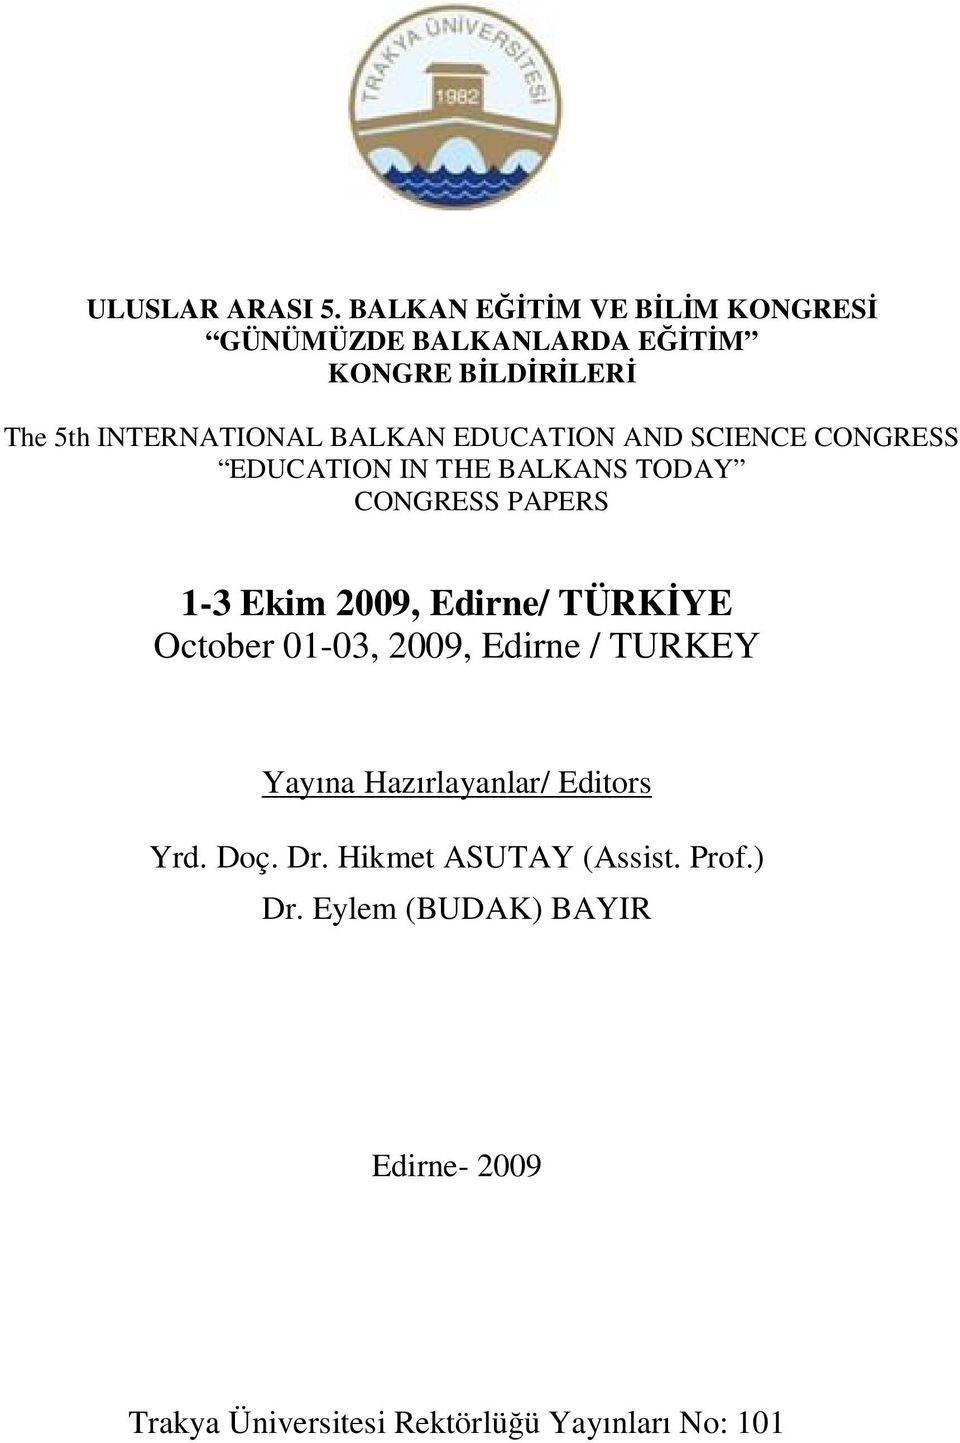 EDUCATION AND SCIENCE CONGRESS EDUCATION IN THE BALKANS TODAY CONGRESS PAPERS 1-3 Ekim 2009, Edirne/